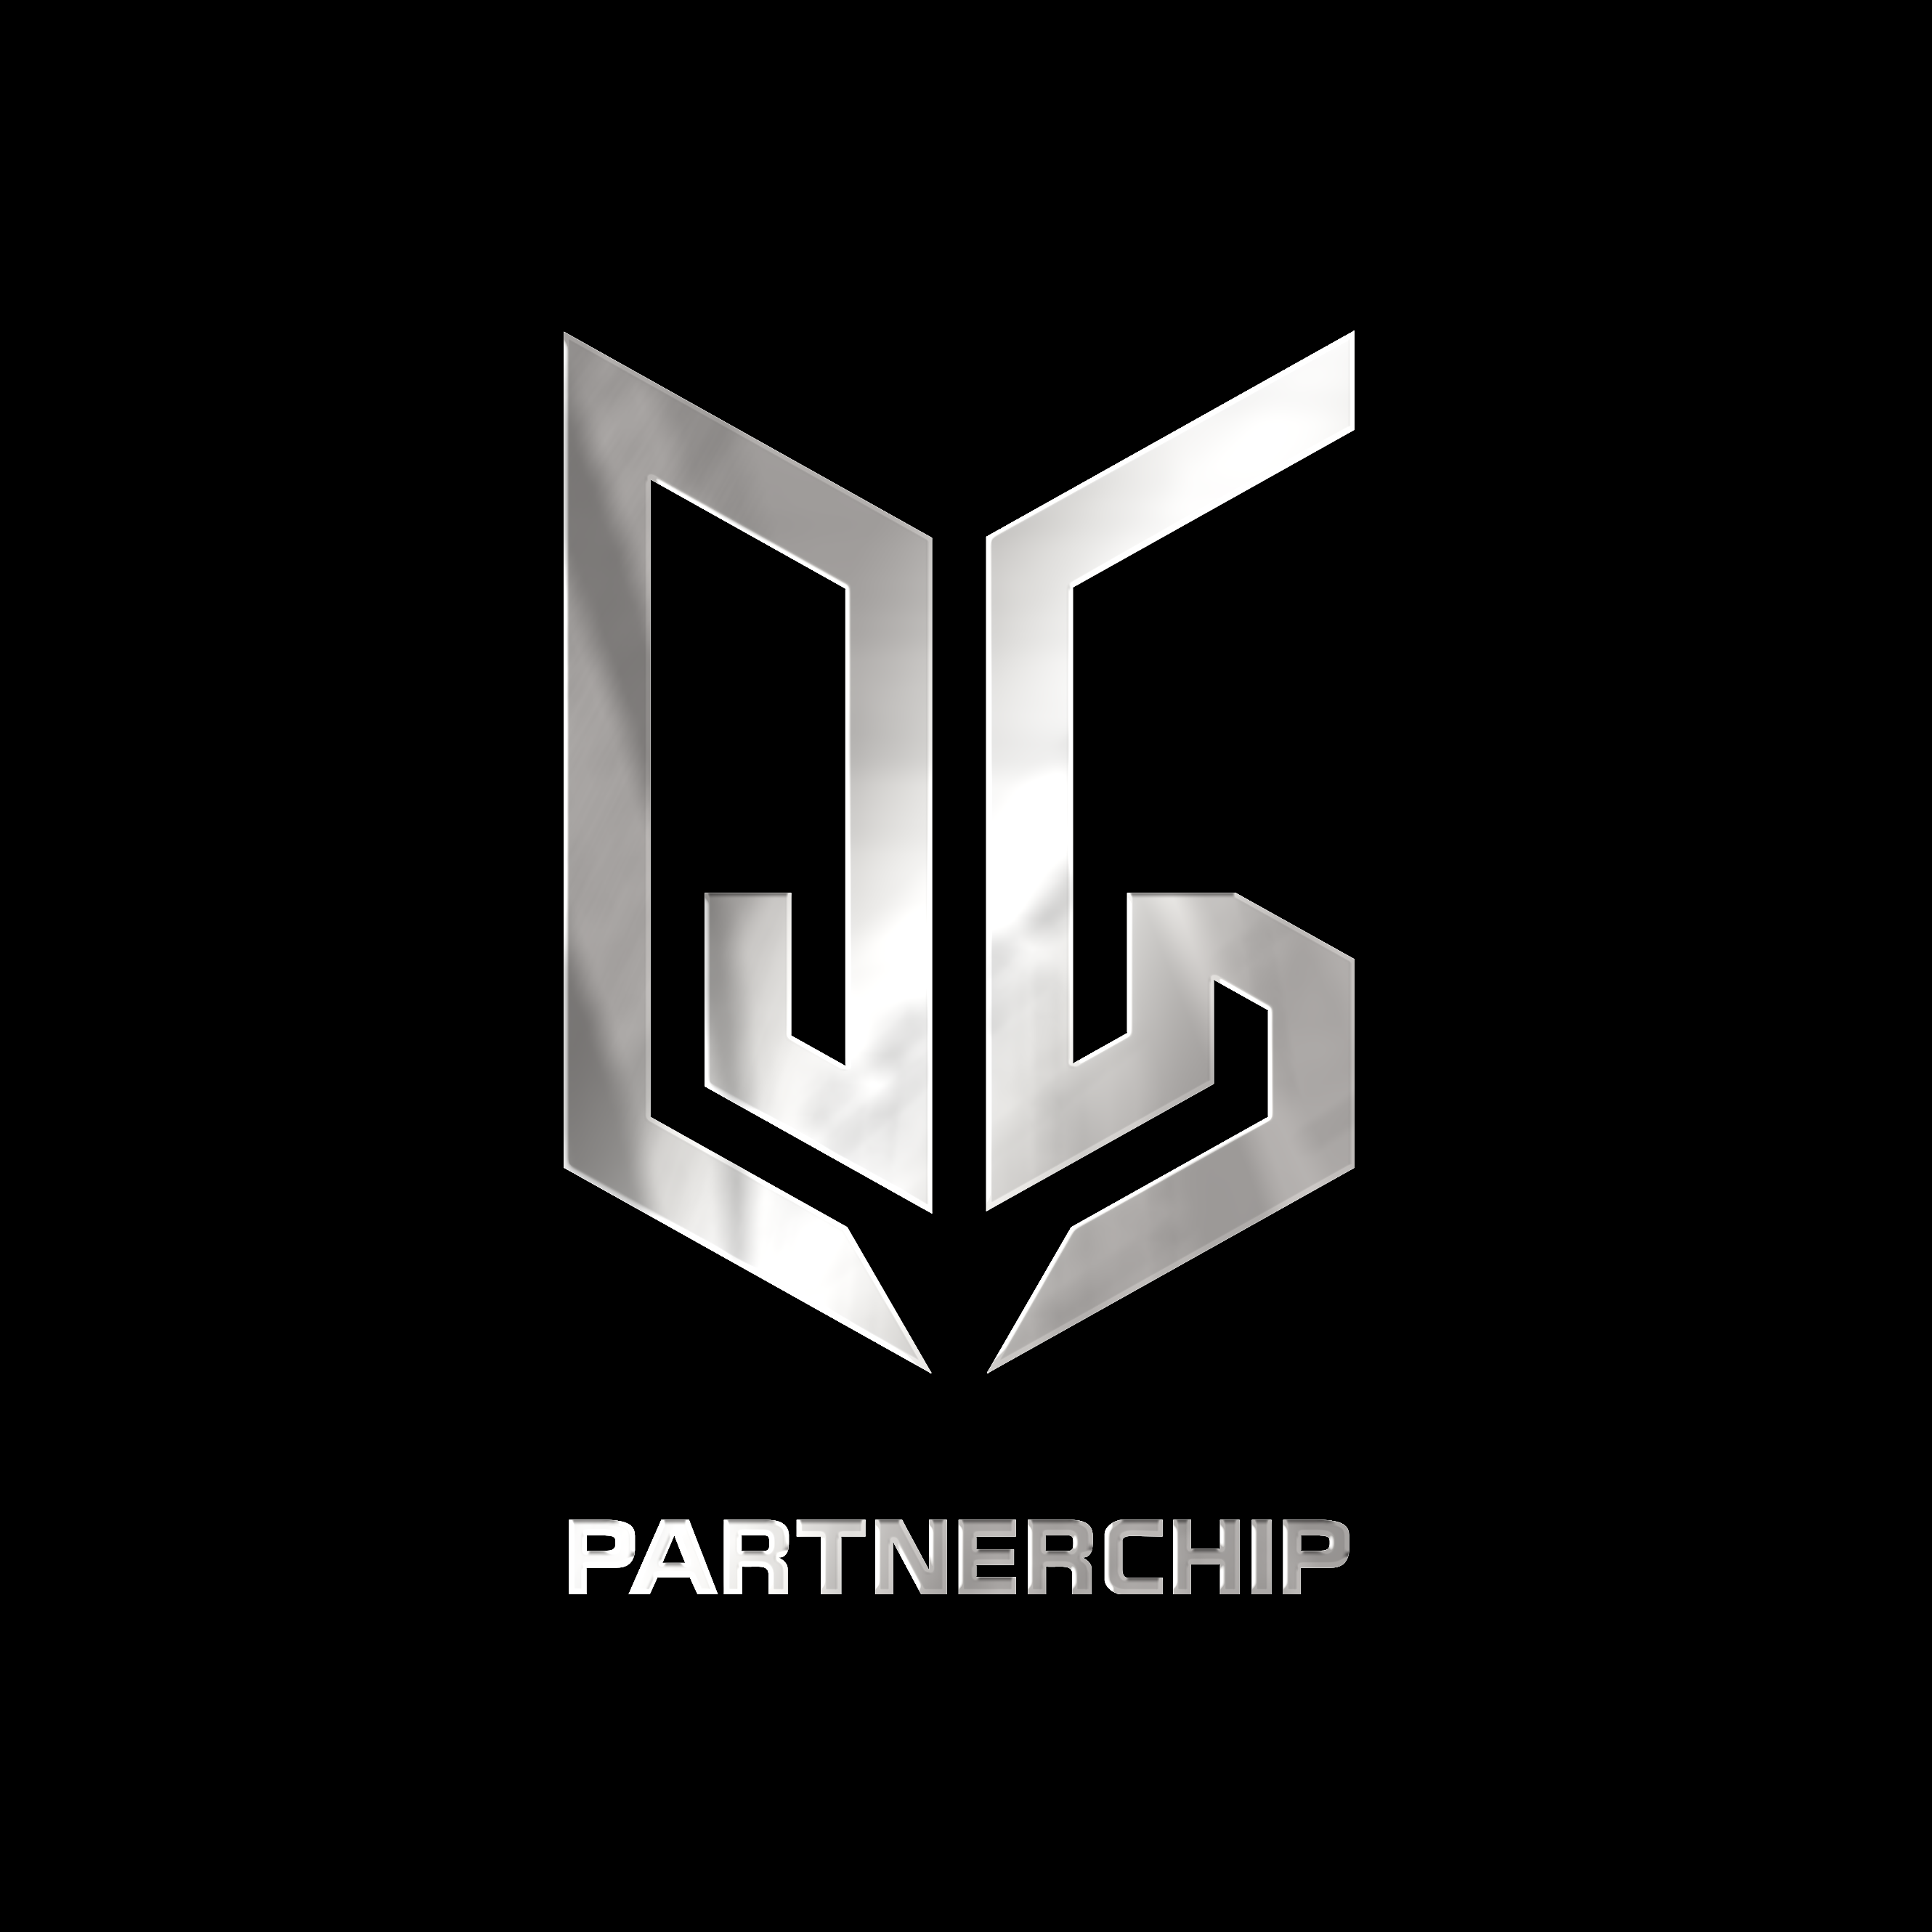 Partnerchip designed and hosted by CementHost.com